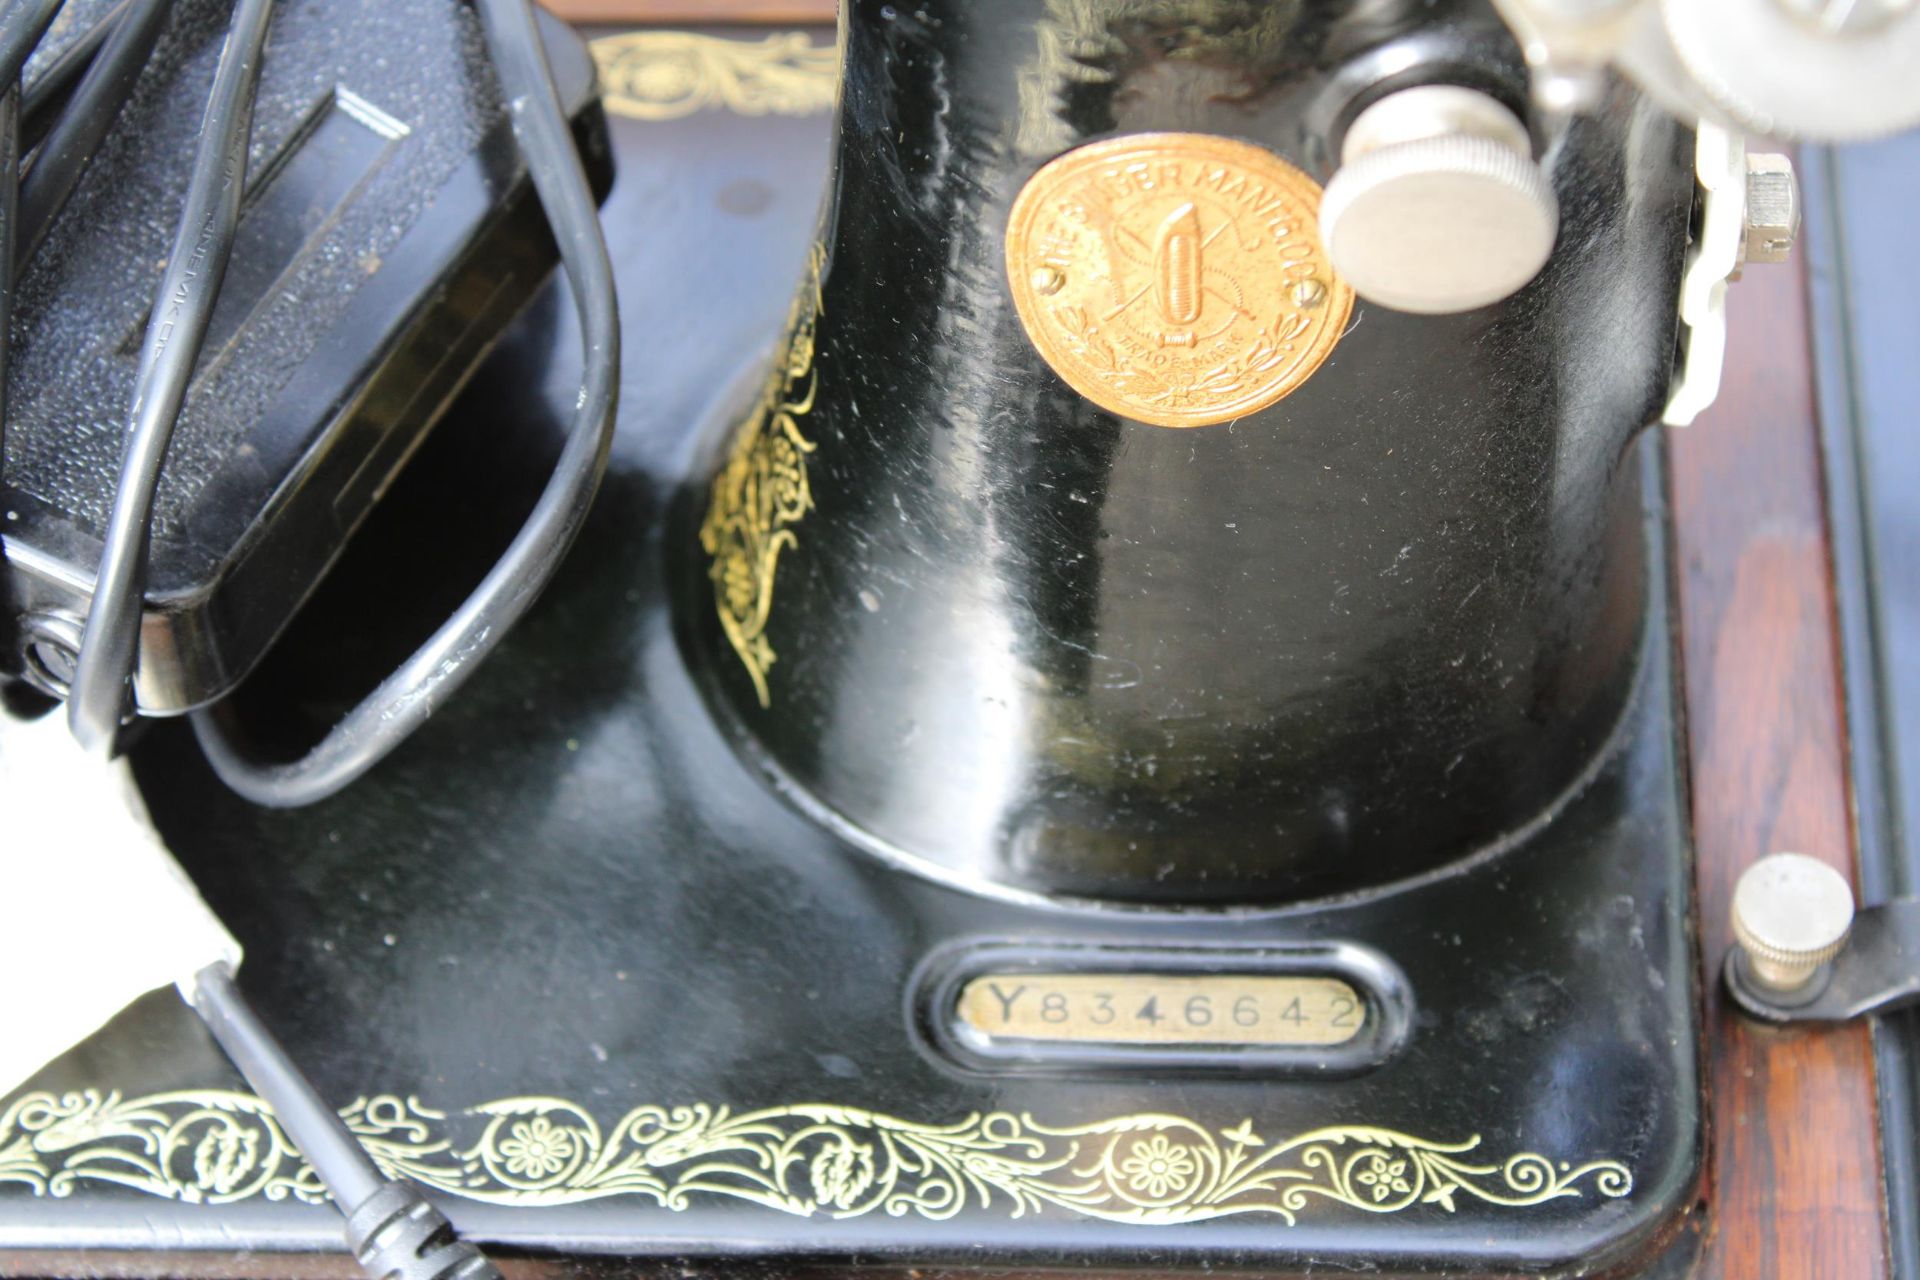 A VINTAGE SINGER SEWING MACHINE WITH WOODEN CARRY CASE, MANUAL AND SPARE PARTS ETC - Image 3 of 8